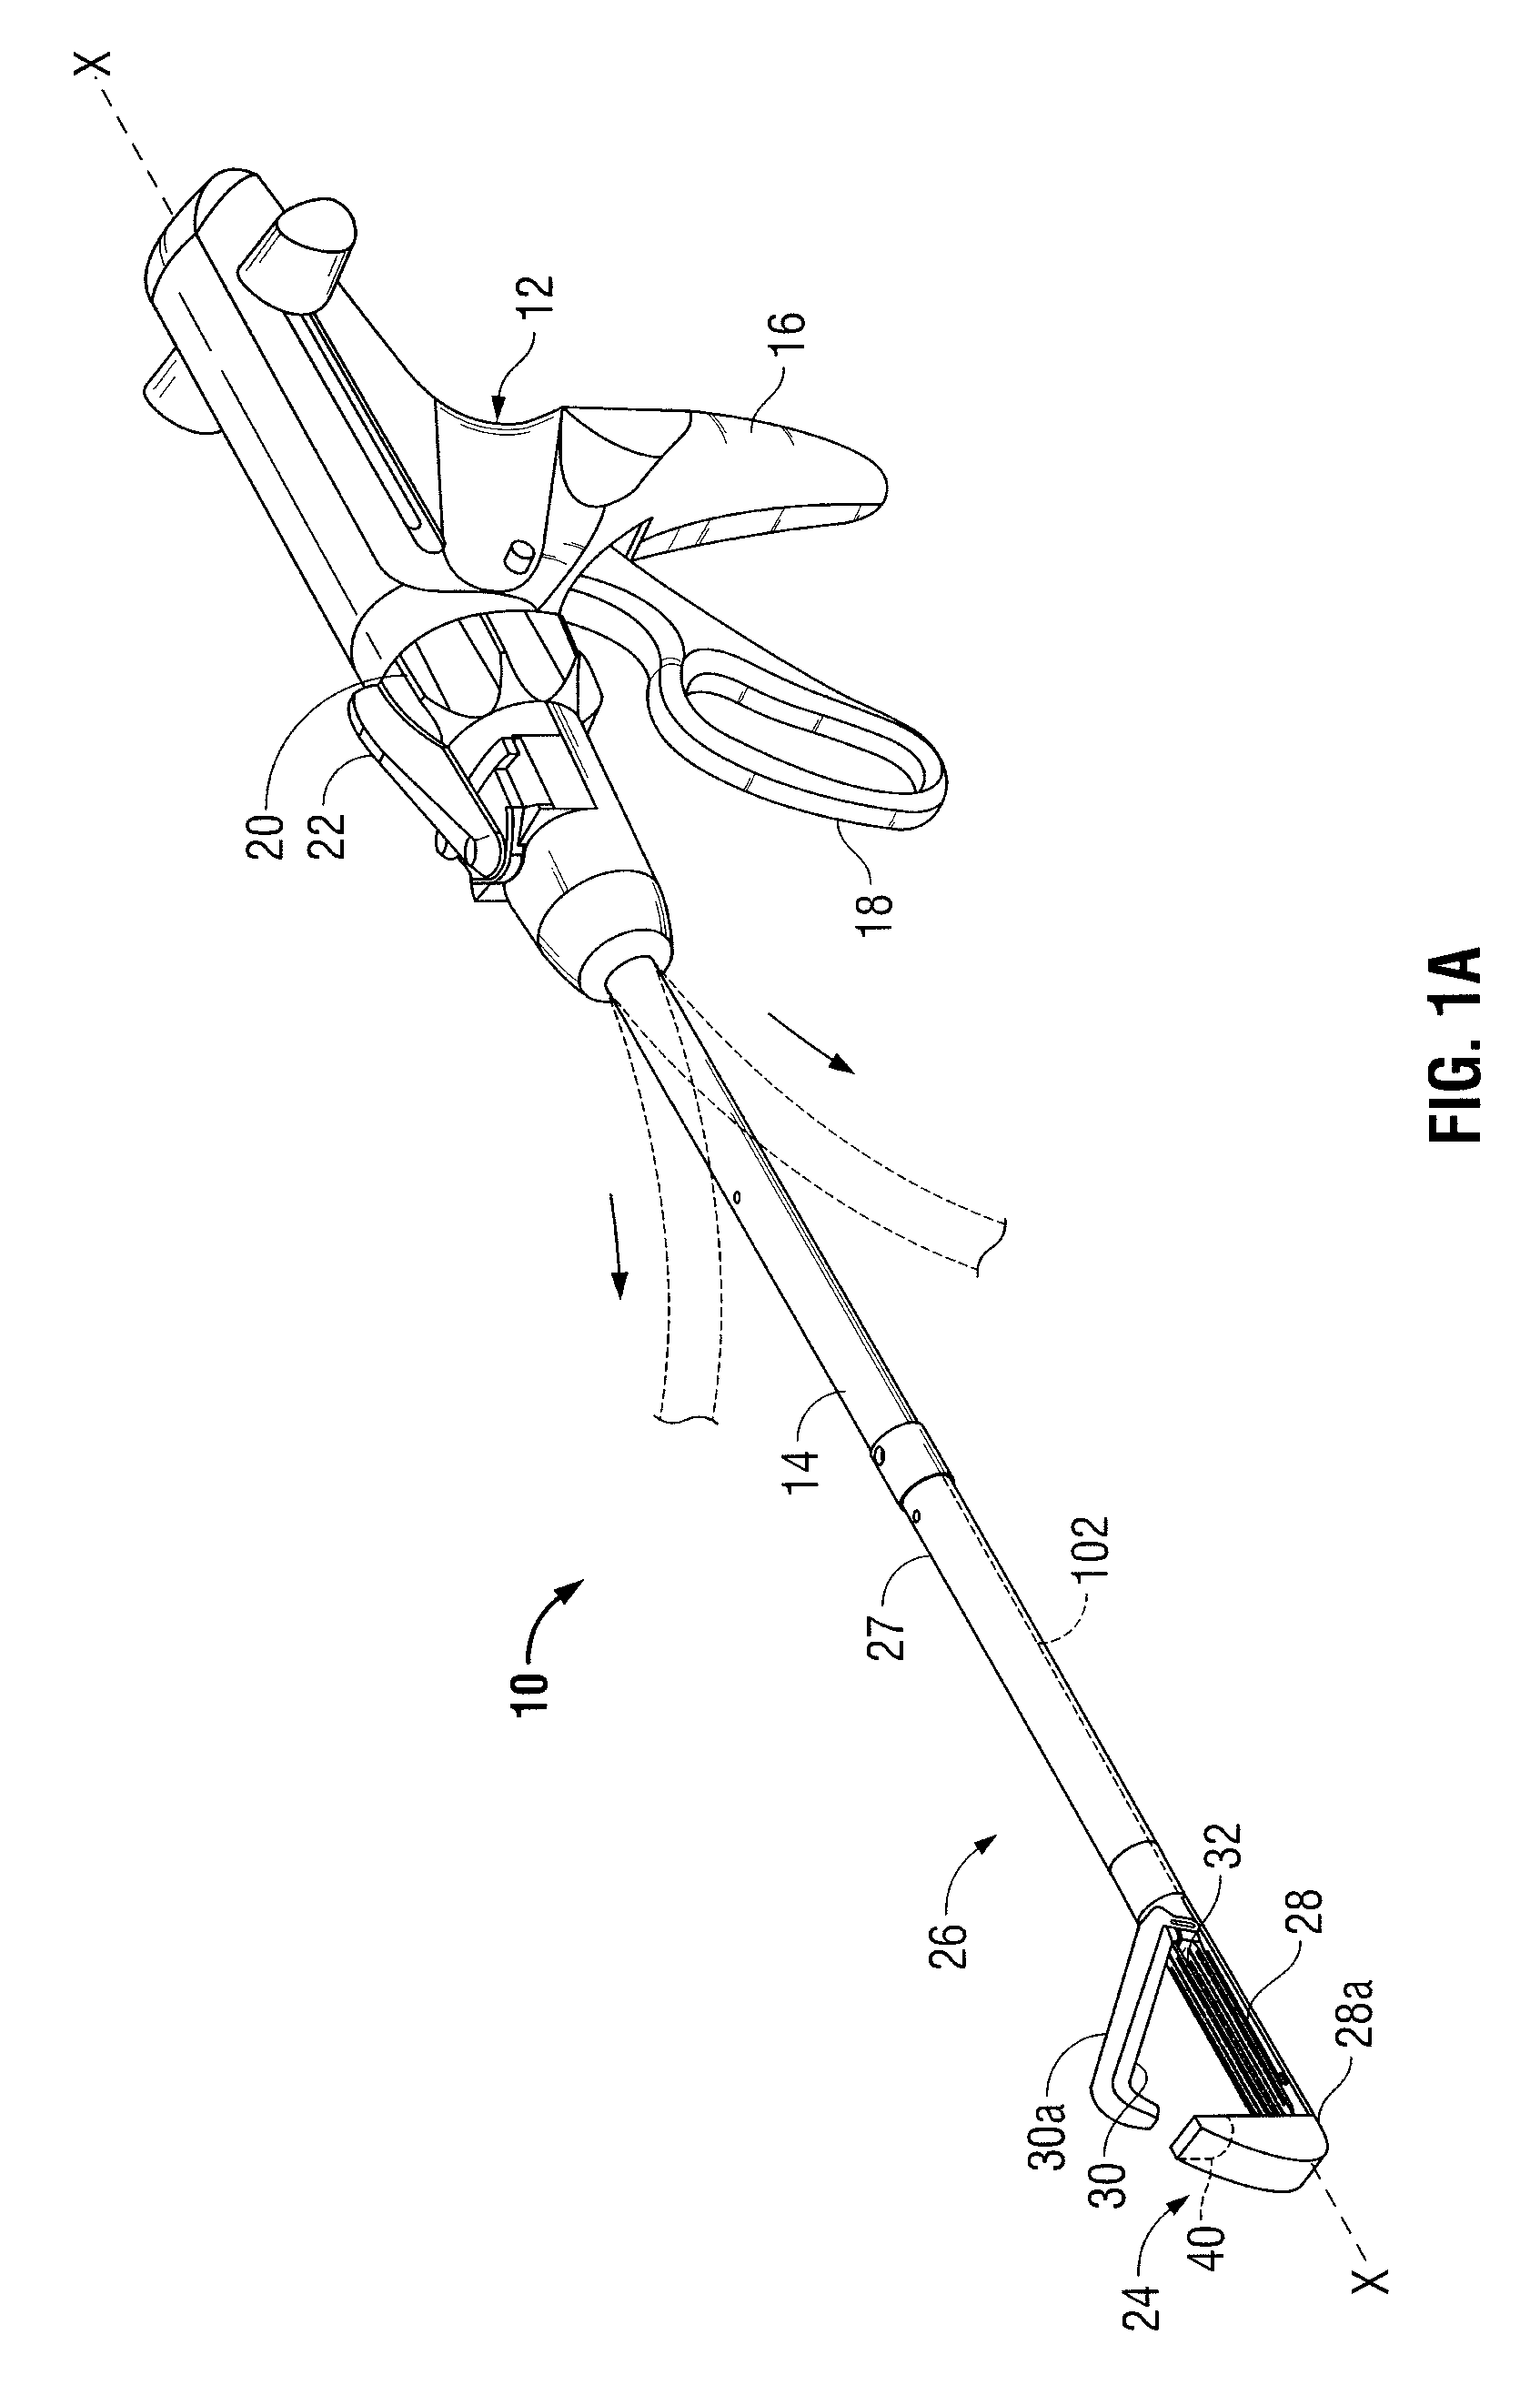 Surgical instrument for joining tissue